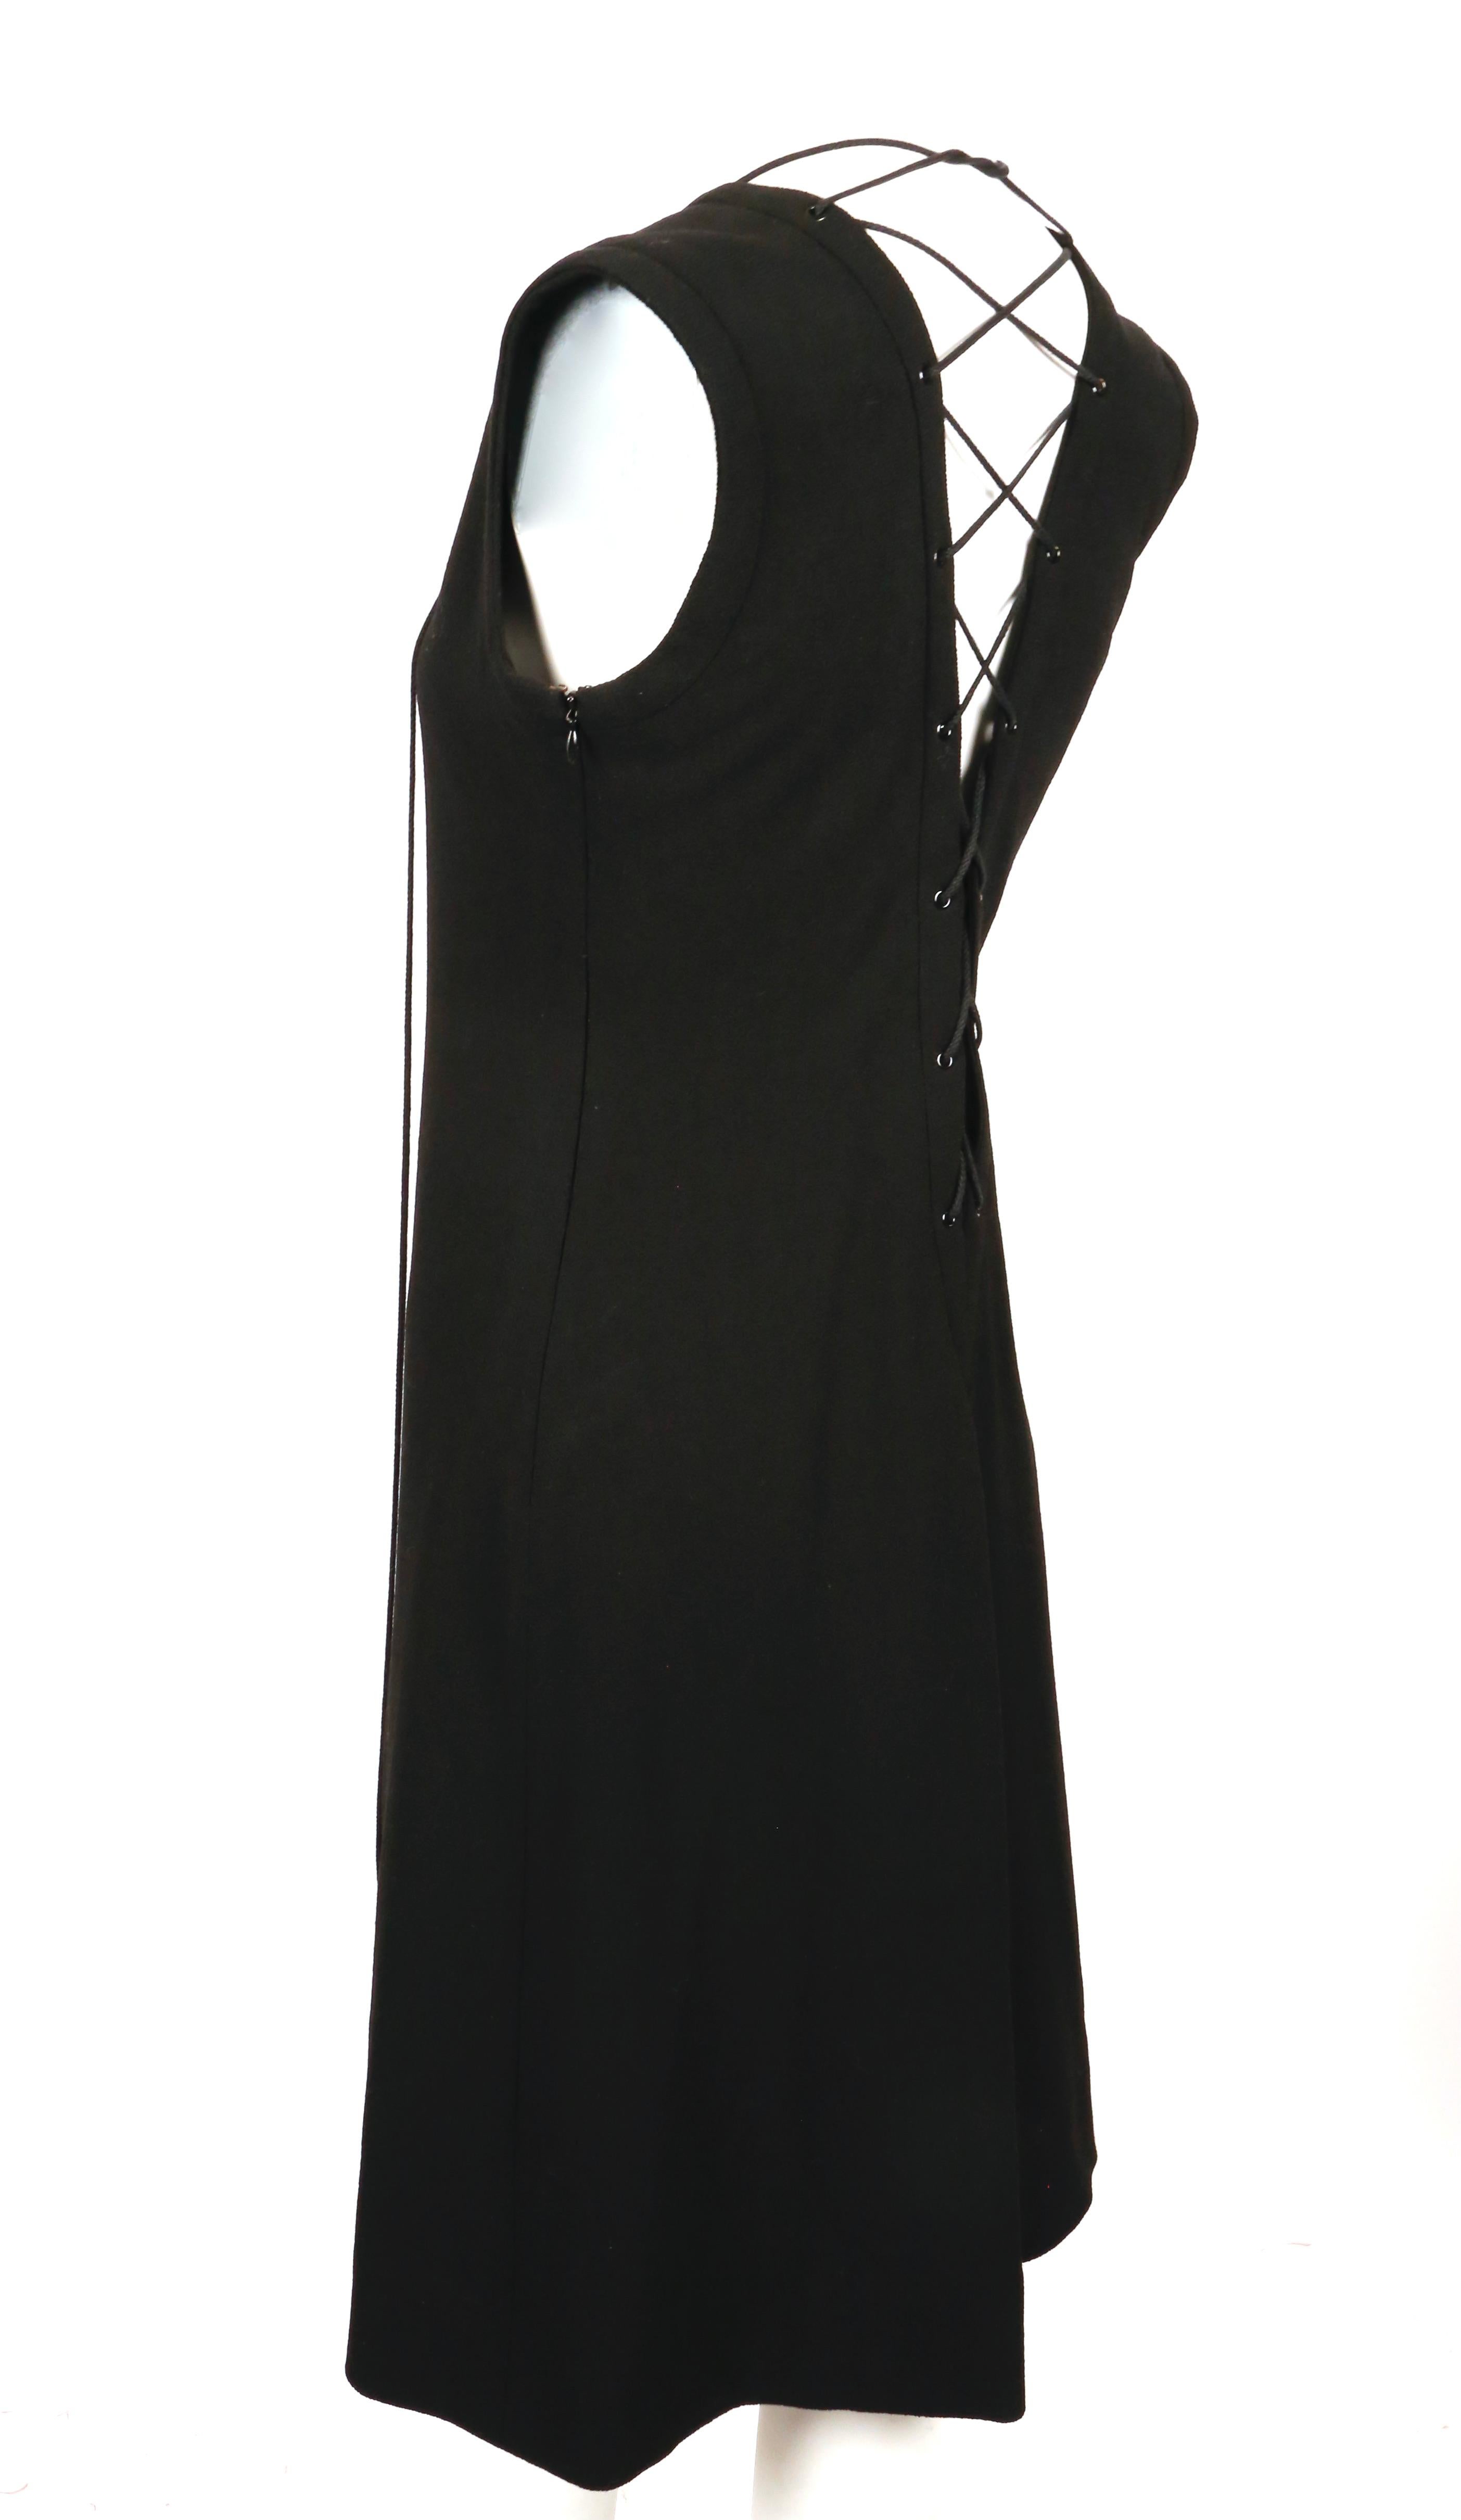 Women's 1990's YVES SAINT LAURENT rive gauche black wool dress with lace up back For Sale